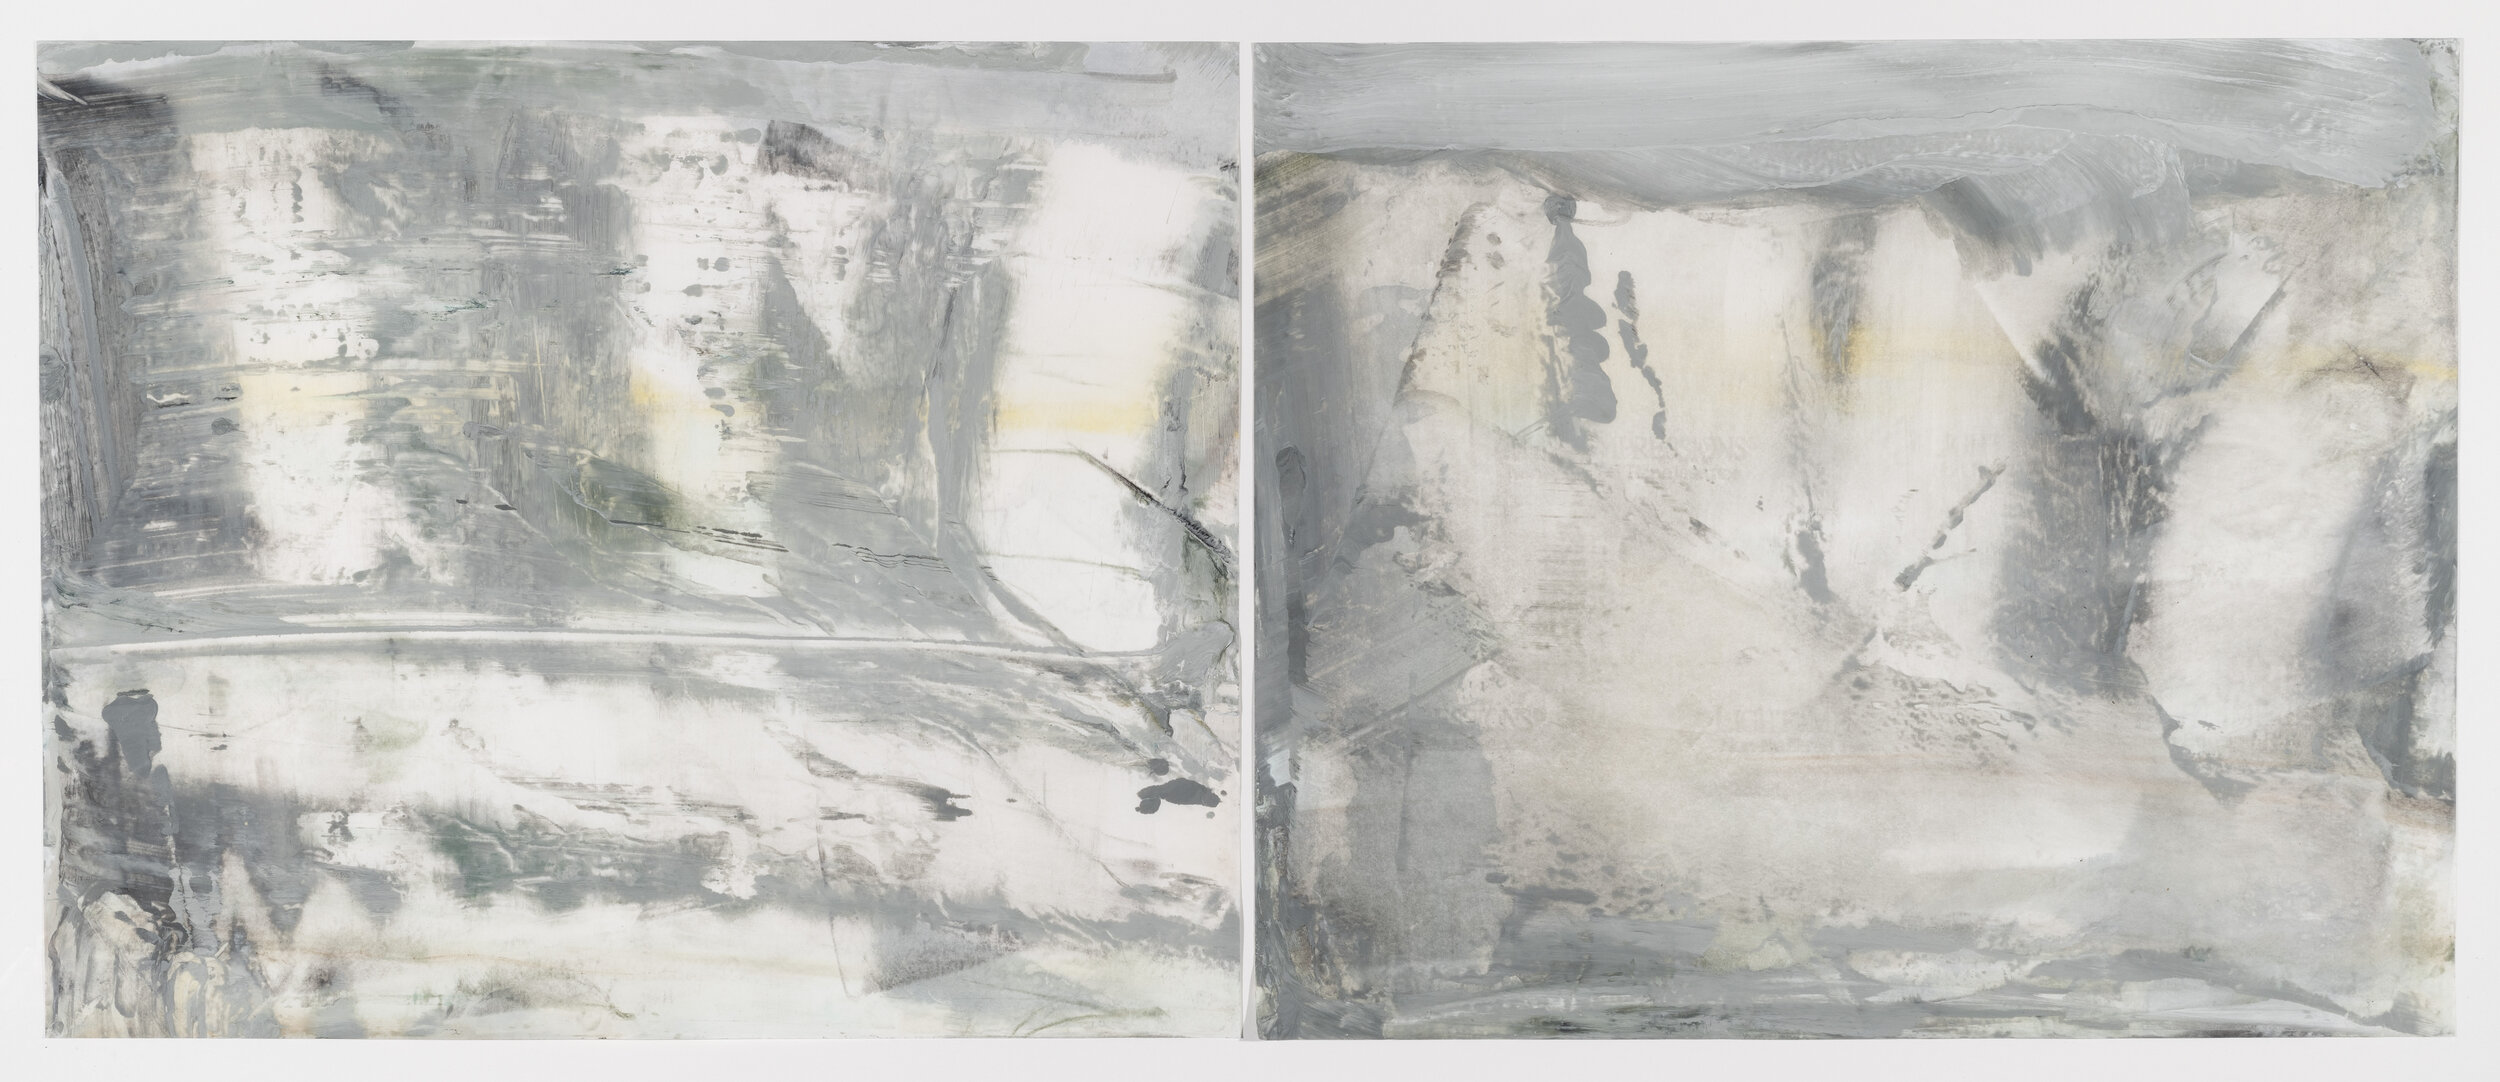 Wyborg, 2019, diptych, encaustic wax on Japanese rice paper, 32 x 56 in, SOLD